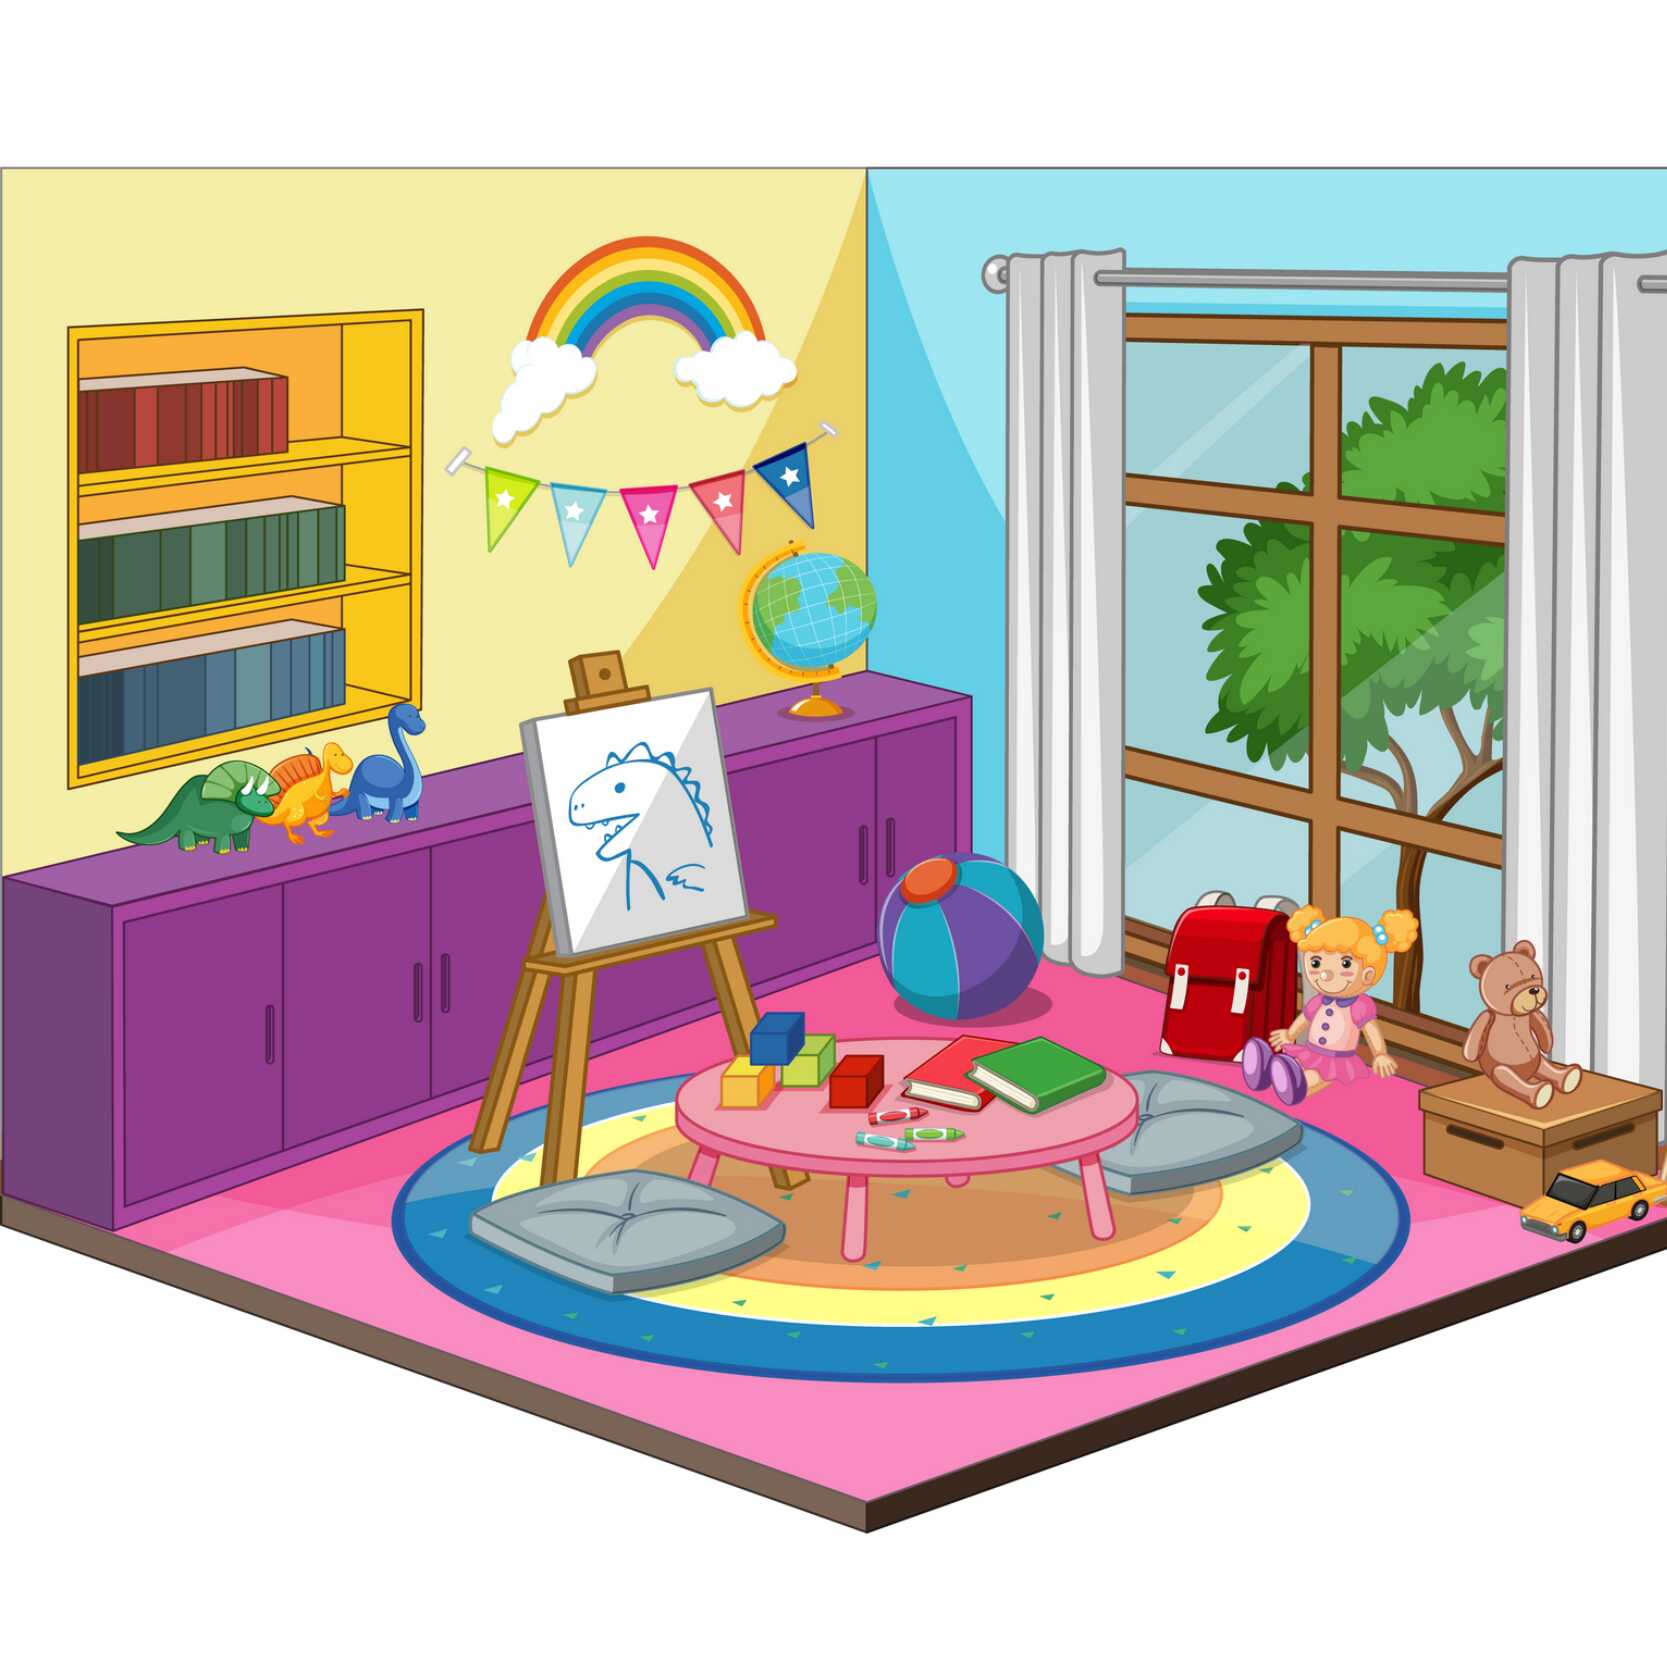 English vocabulary with pictures - Parts of a house - Kids room